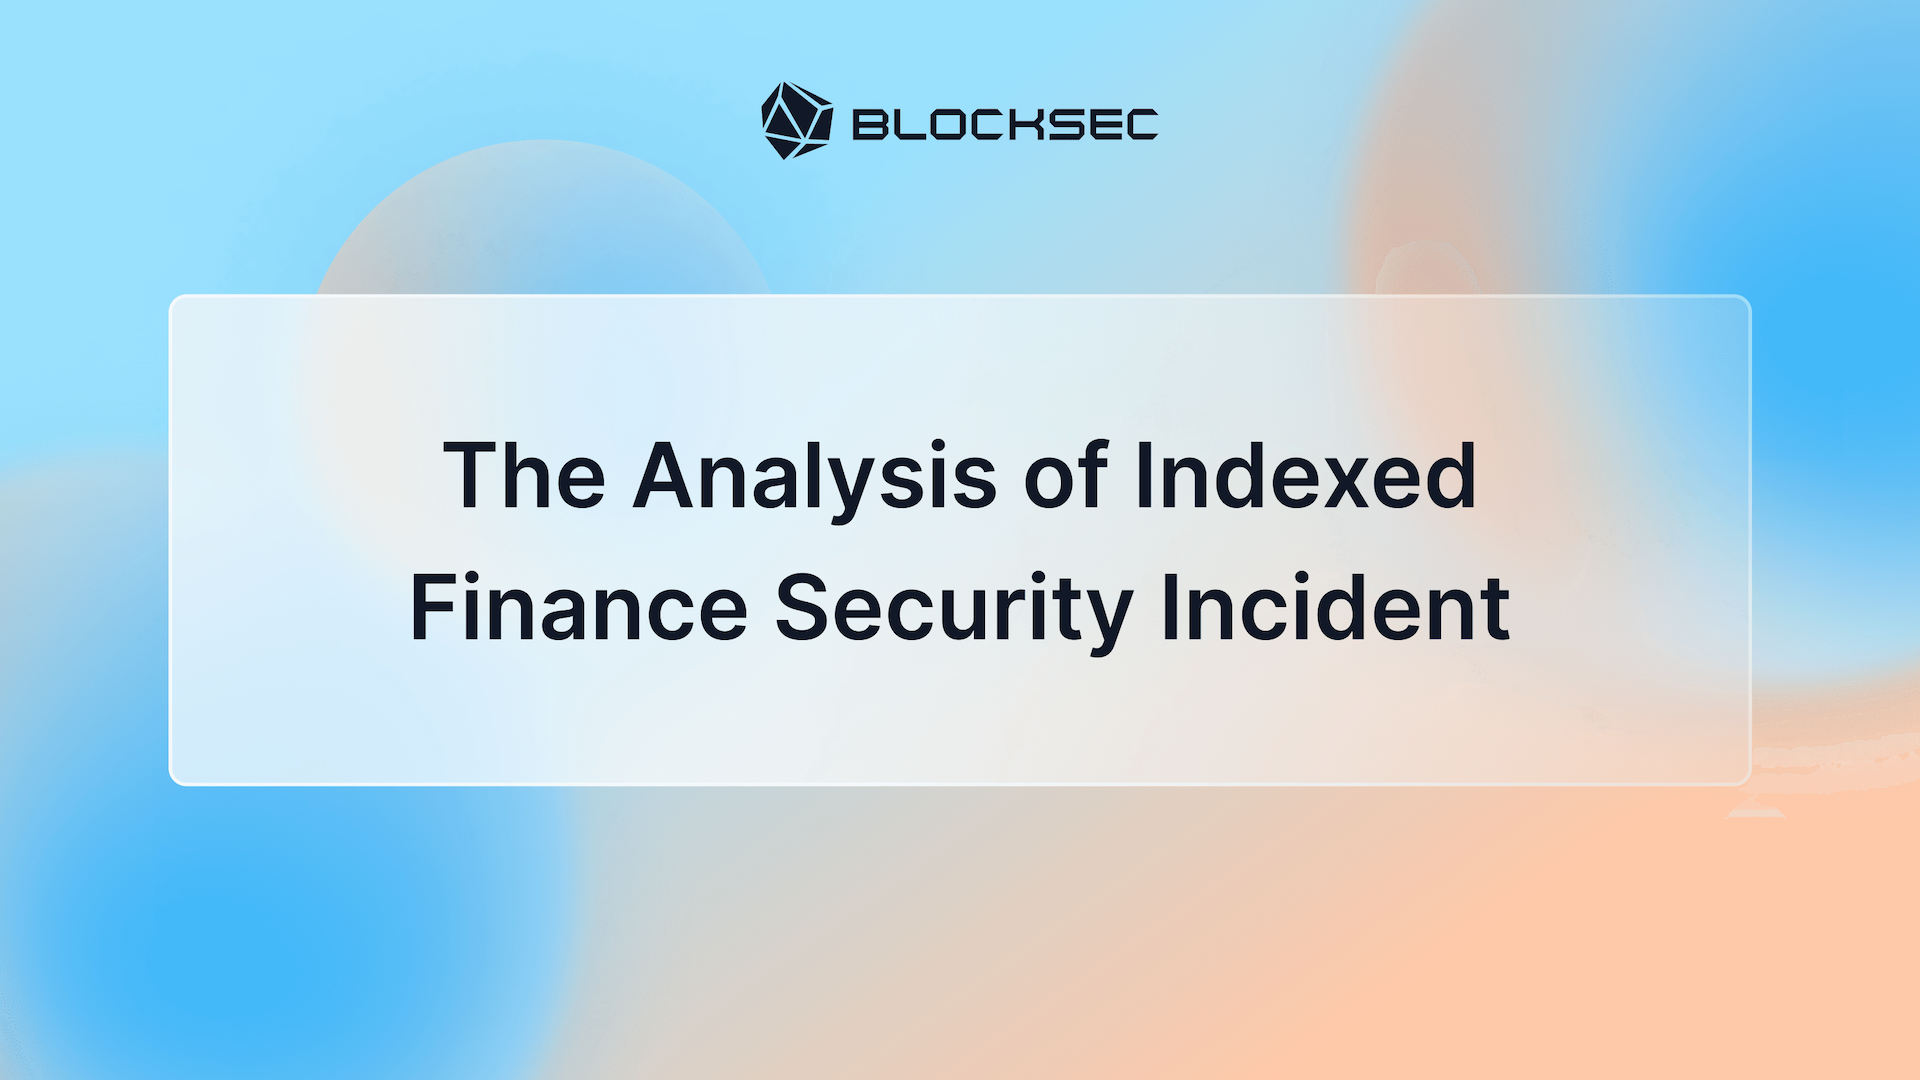 The Analysis of Indexed Finance Security Incident